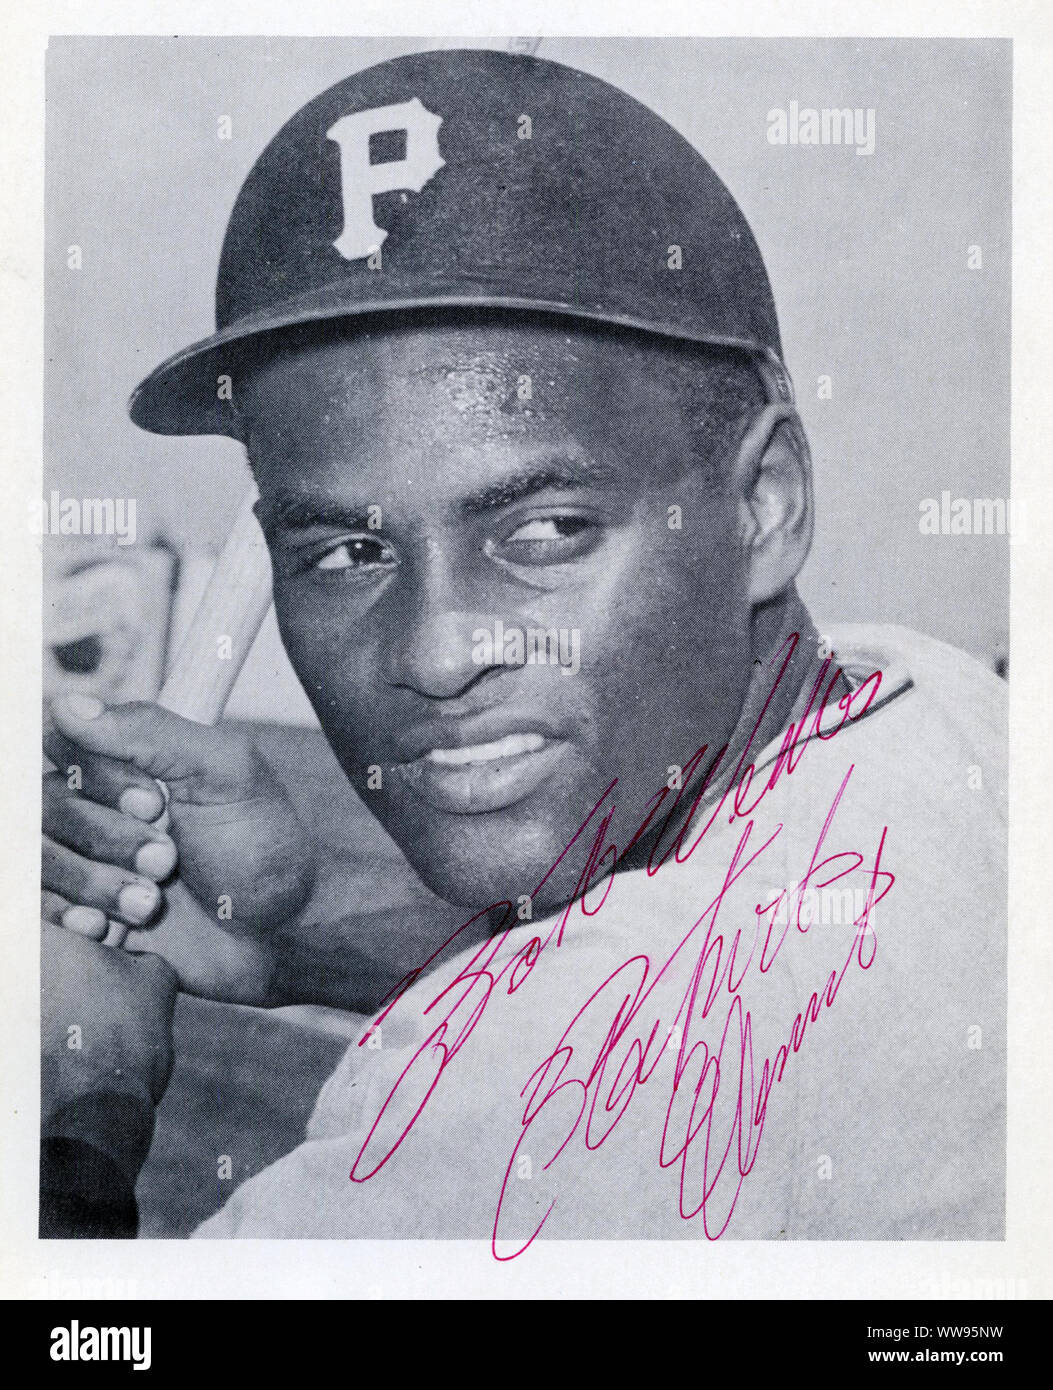 Autographed photo of Roberto Clemente who was a Hall of Fame